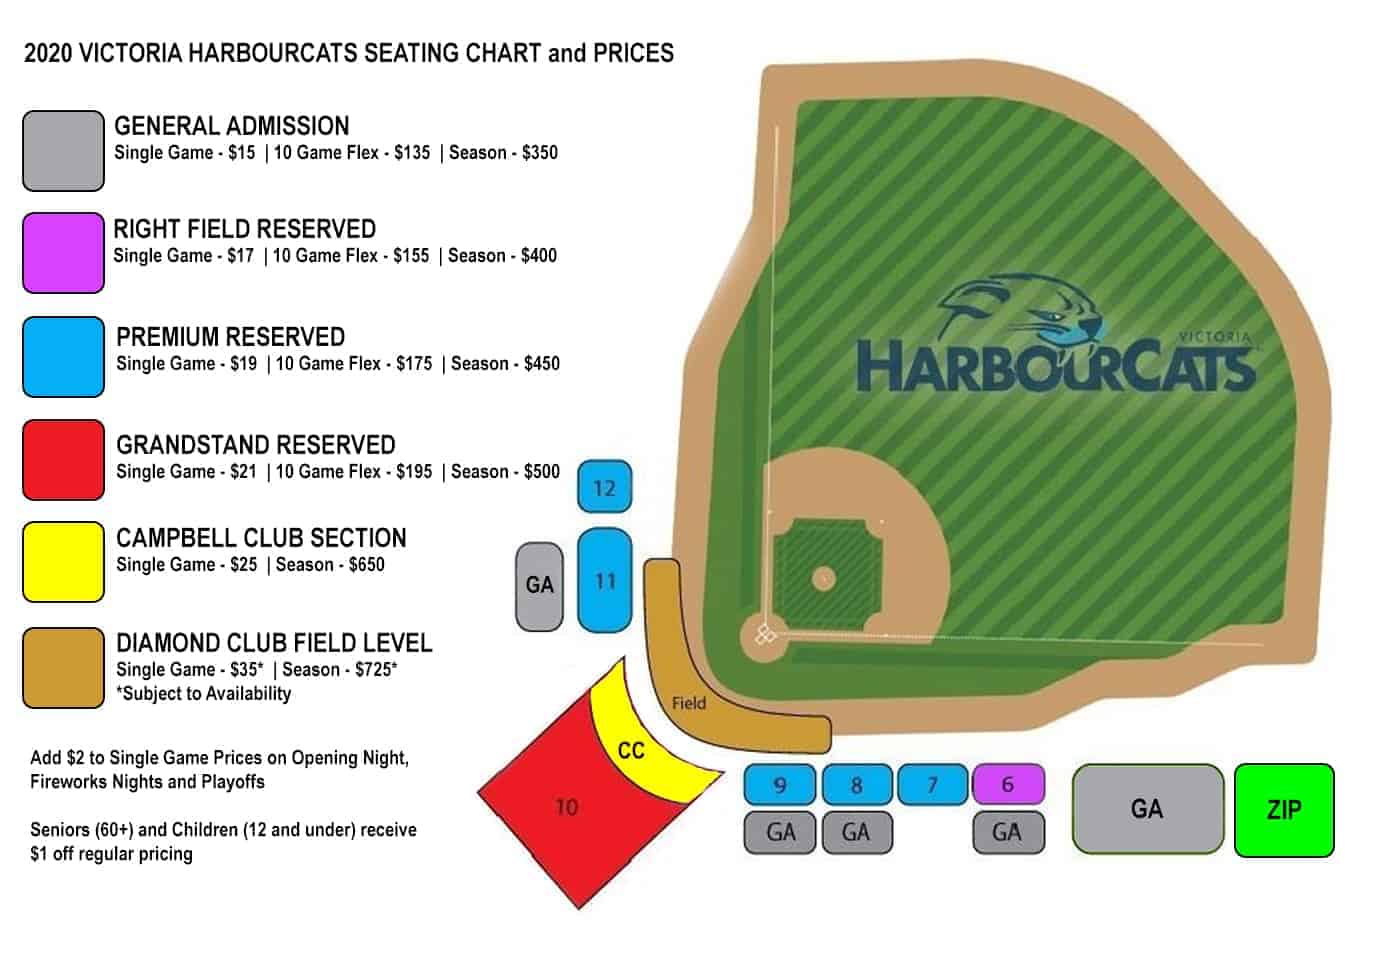 Royal Athletic Park Victoria Seating Chart